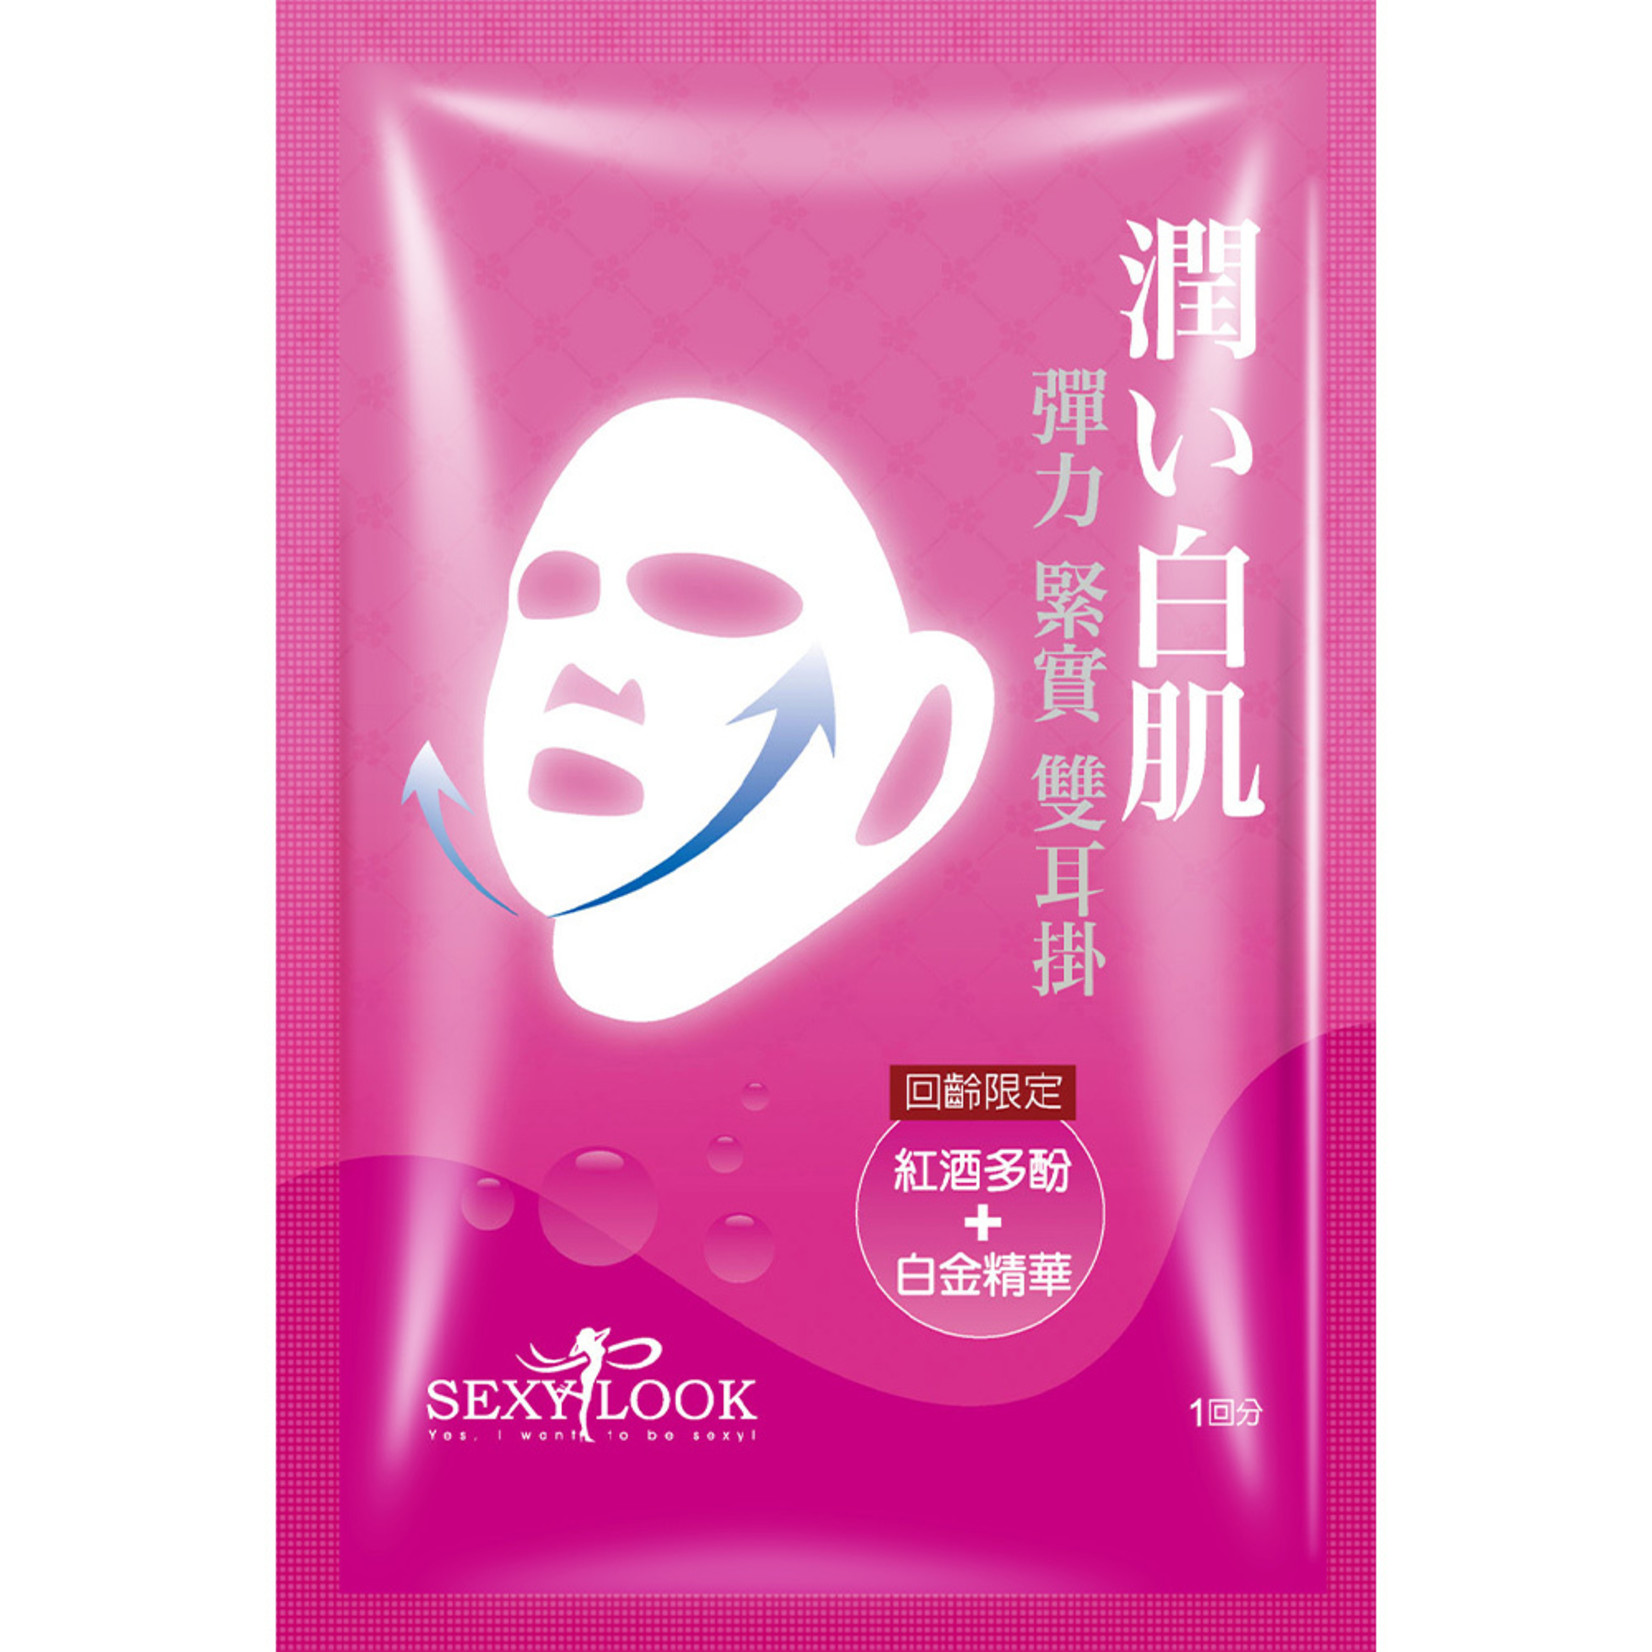 SEXYLOOK Red Wine Polyphenols + Platinum Double Lifting Mask